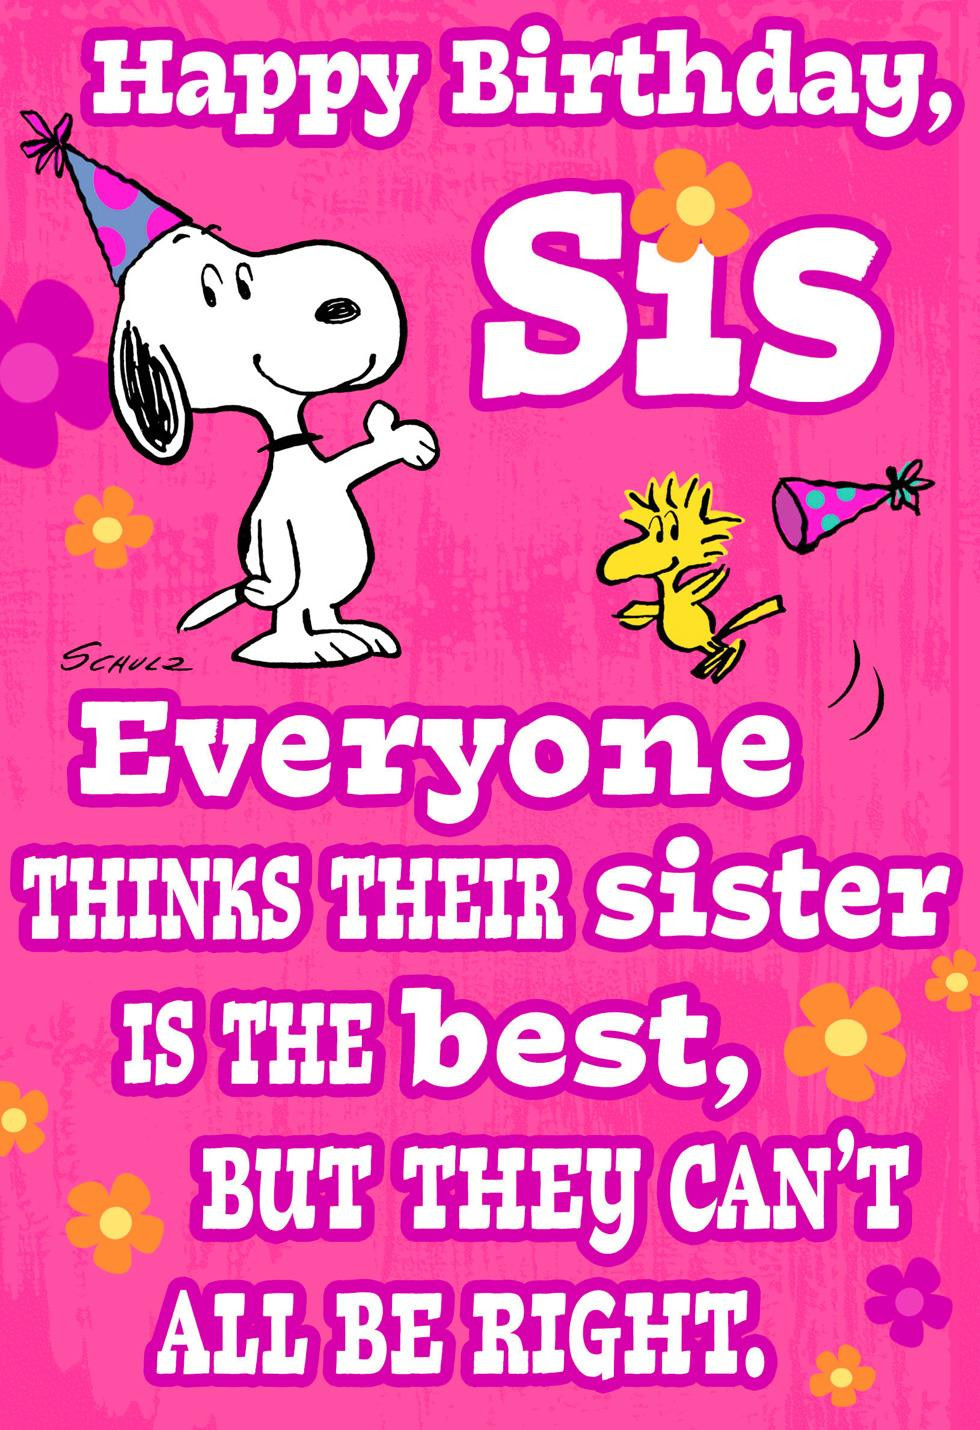 Birthday Cards For Sister Funny
 Peanuts Snoopy and Woodstock Best Sister Funny Birthday